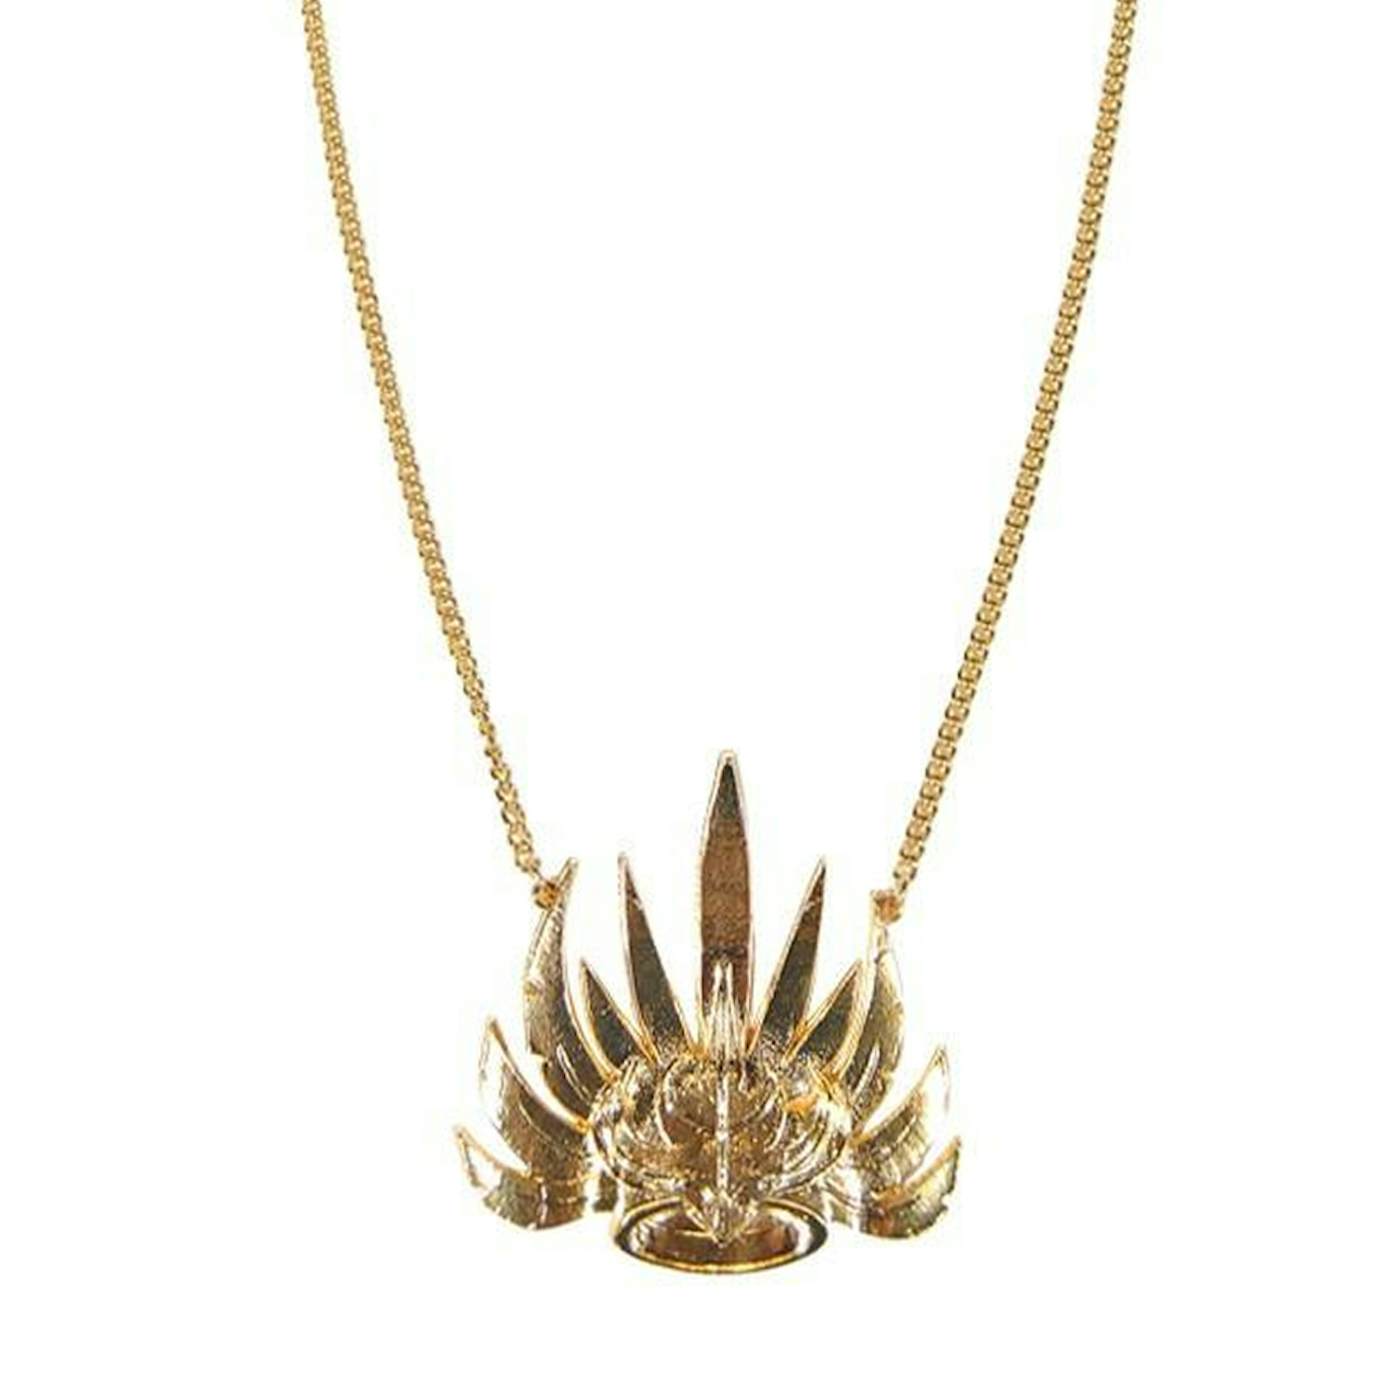 Empire of the Sun Golden Crown Necklace